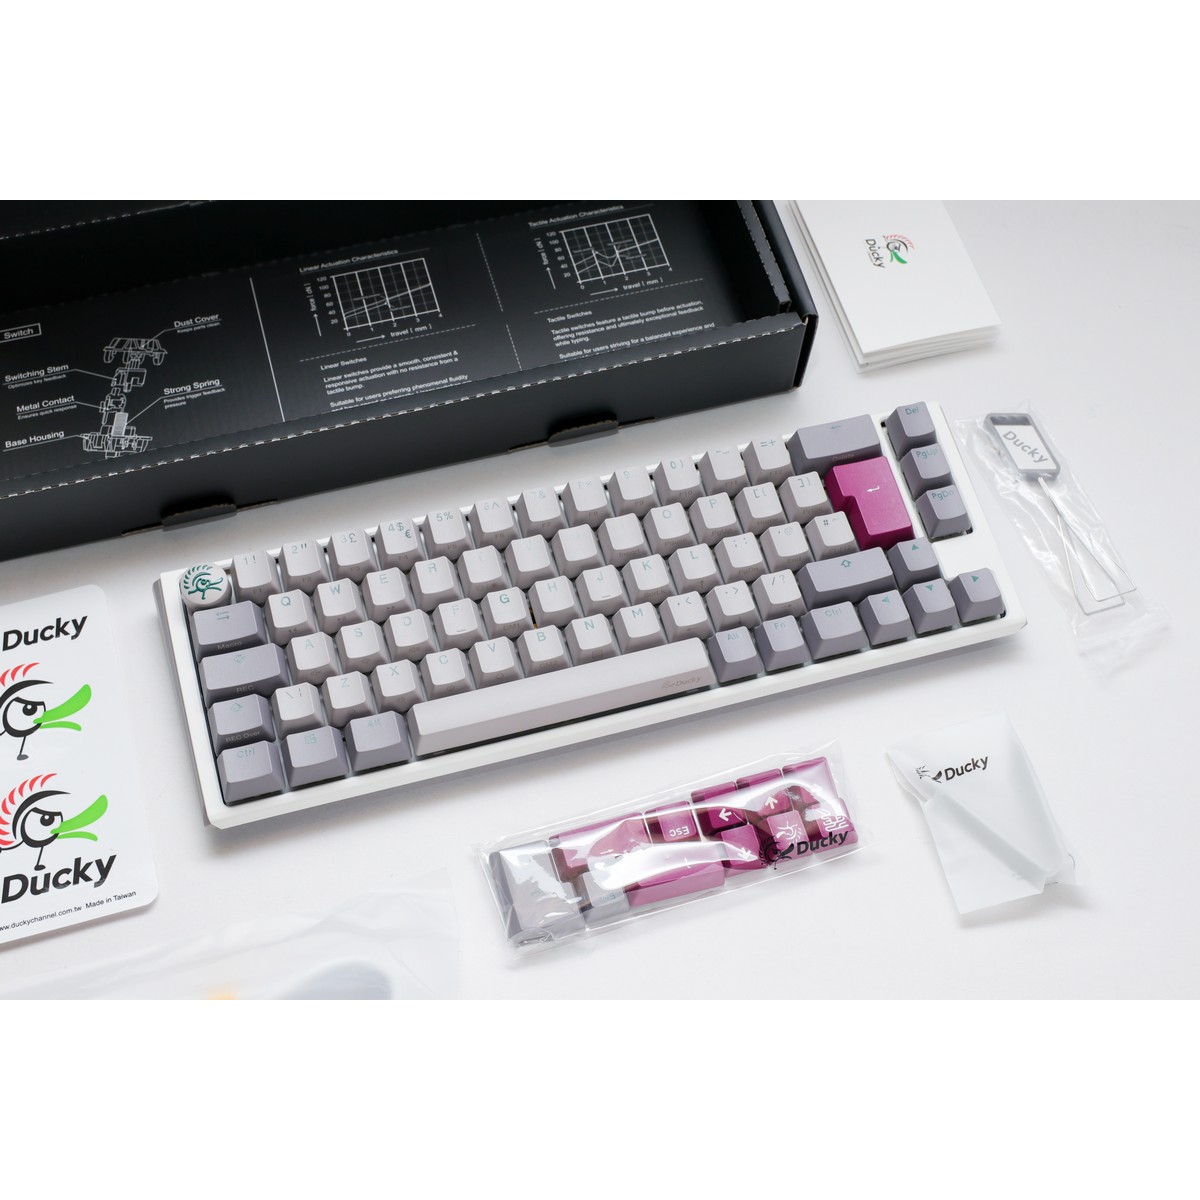 Ducky - Ducky One 3 Mist SF 65% USB RGB Mechanical Gaming Keyboard Cherry MX Red Switch - UK Layout